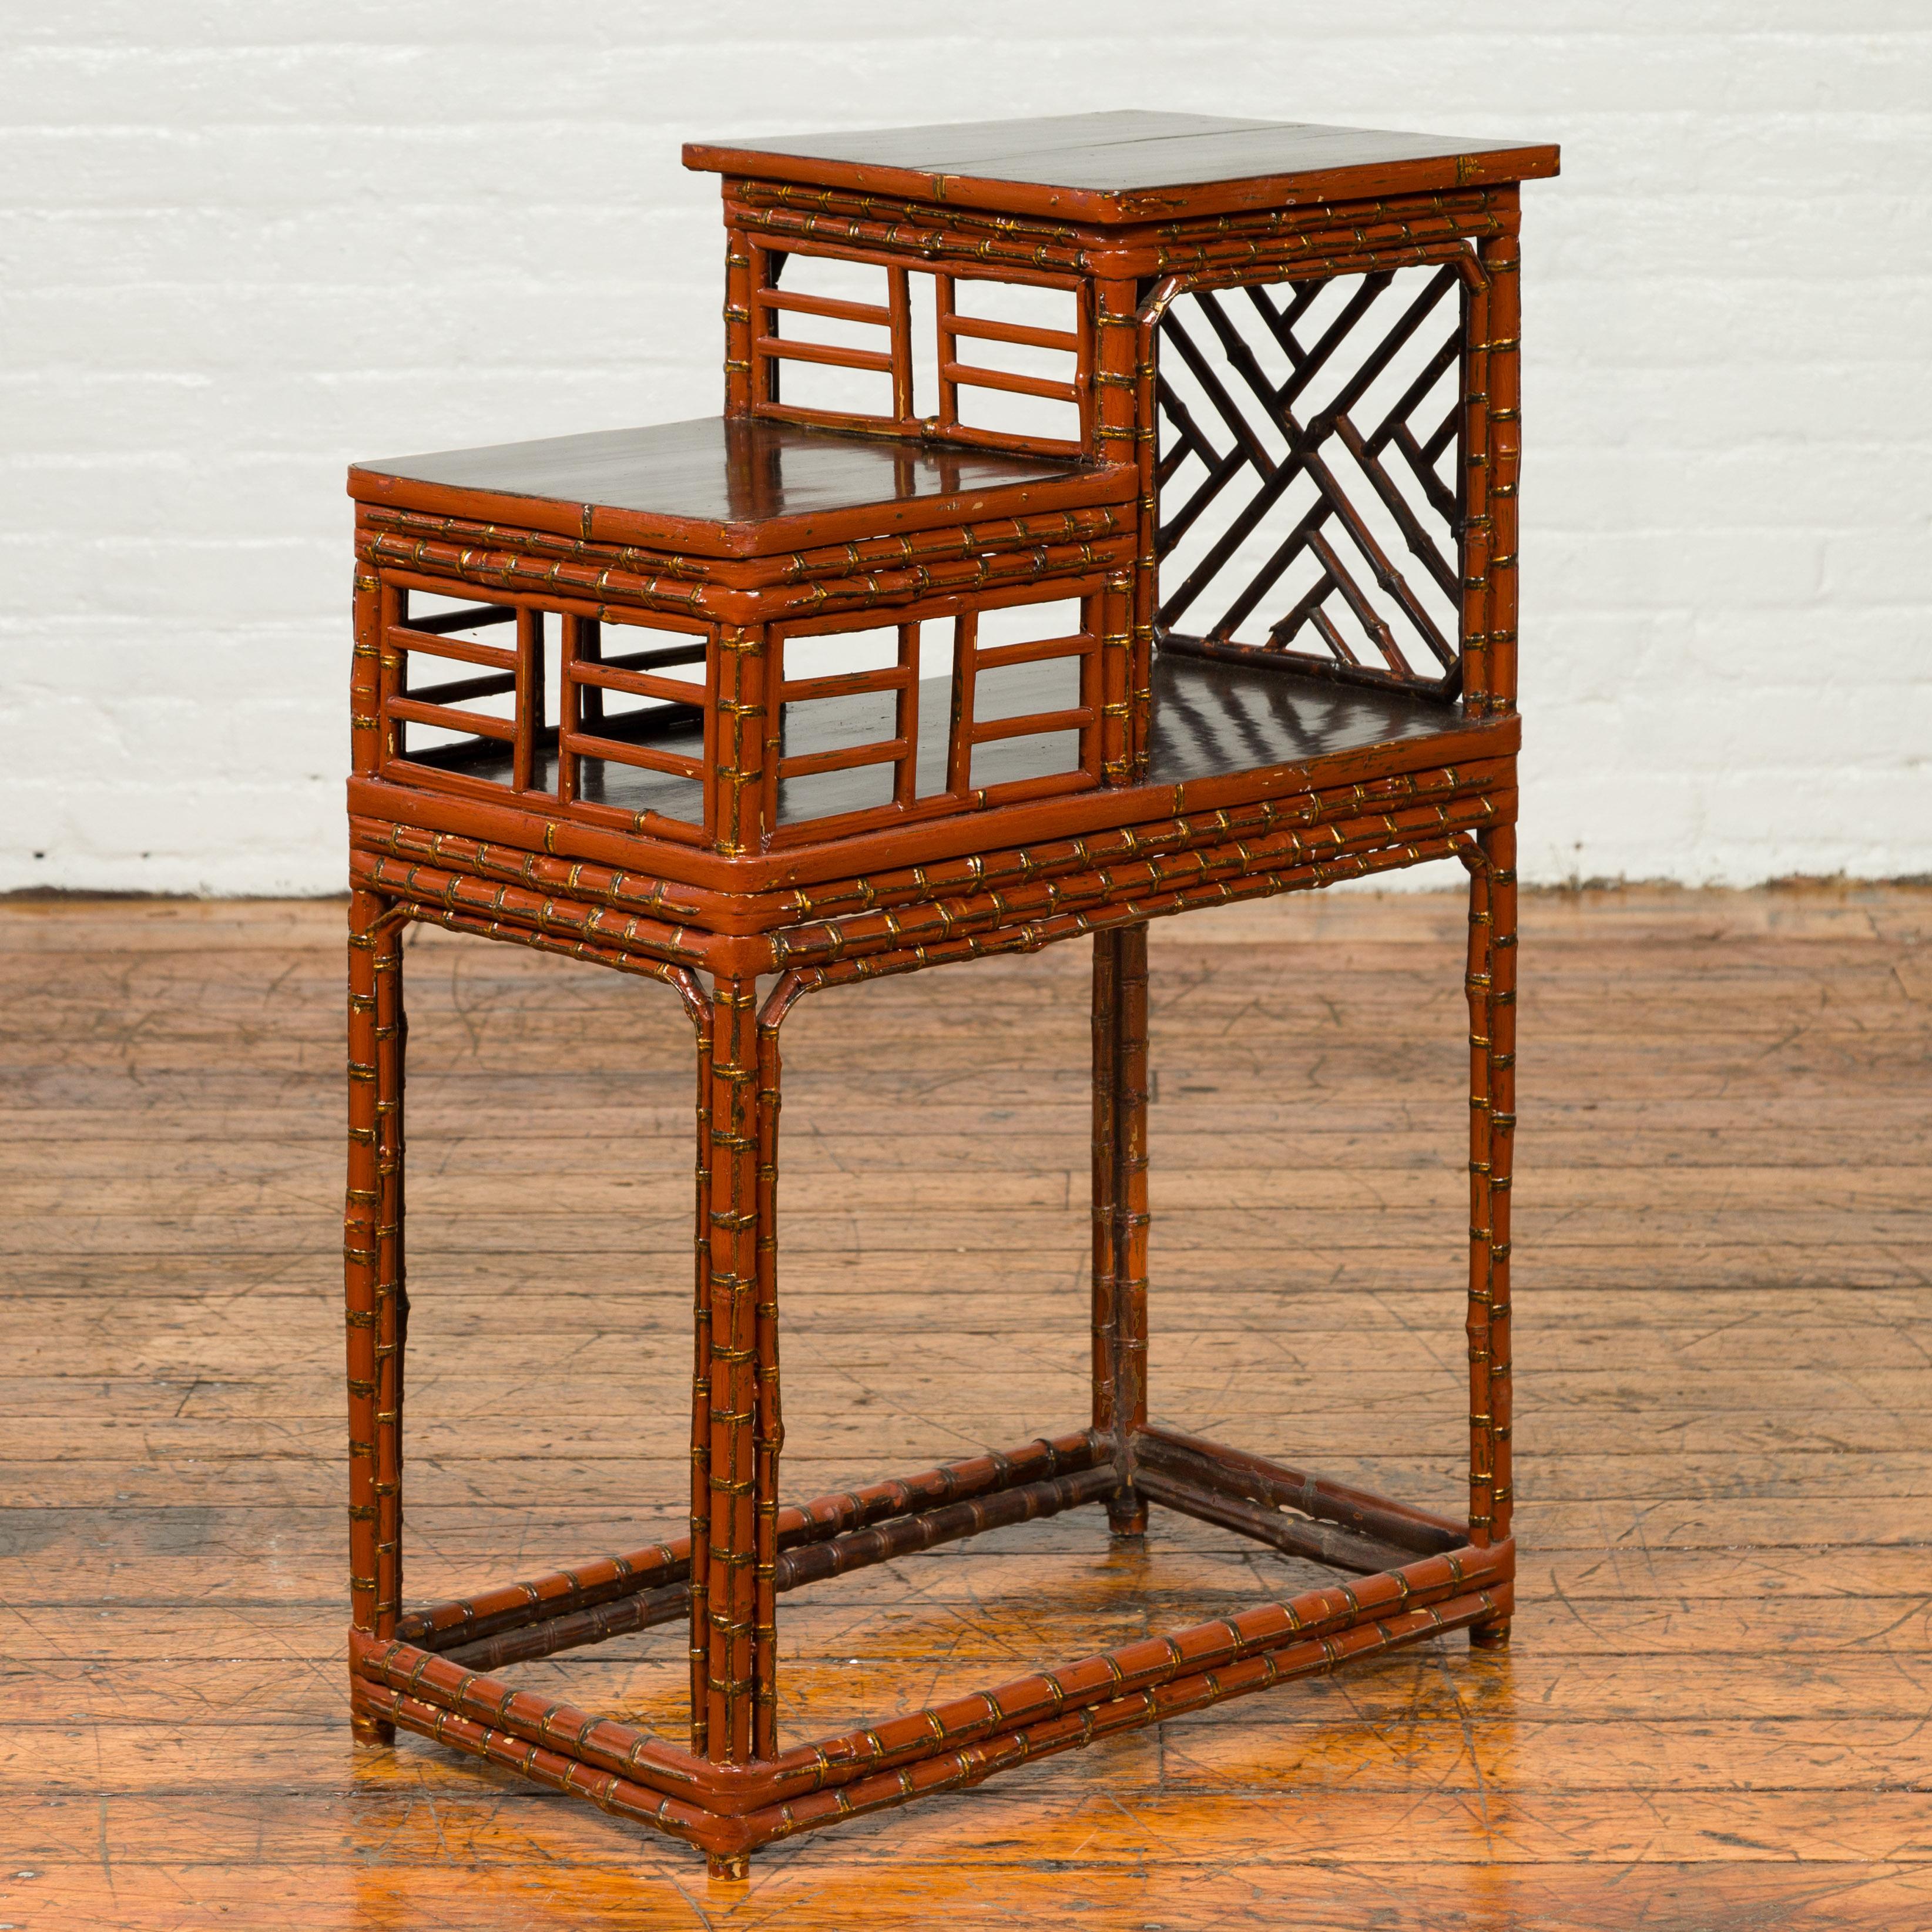 A Chinese vintage tiered bamboo lamp table from the mid-20th century, with geometric patterns. Born in China during the midcentury period, this handsome lamp table features a tiered silhouette accented with geometric patterns and dark lacquered